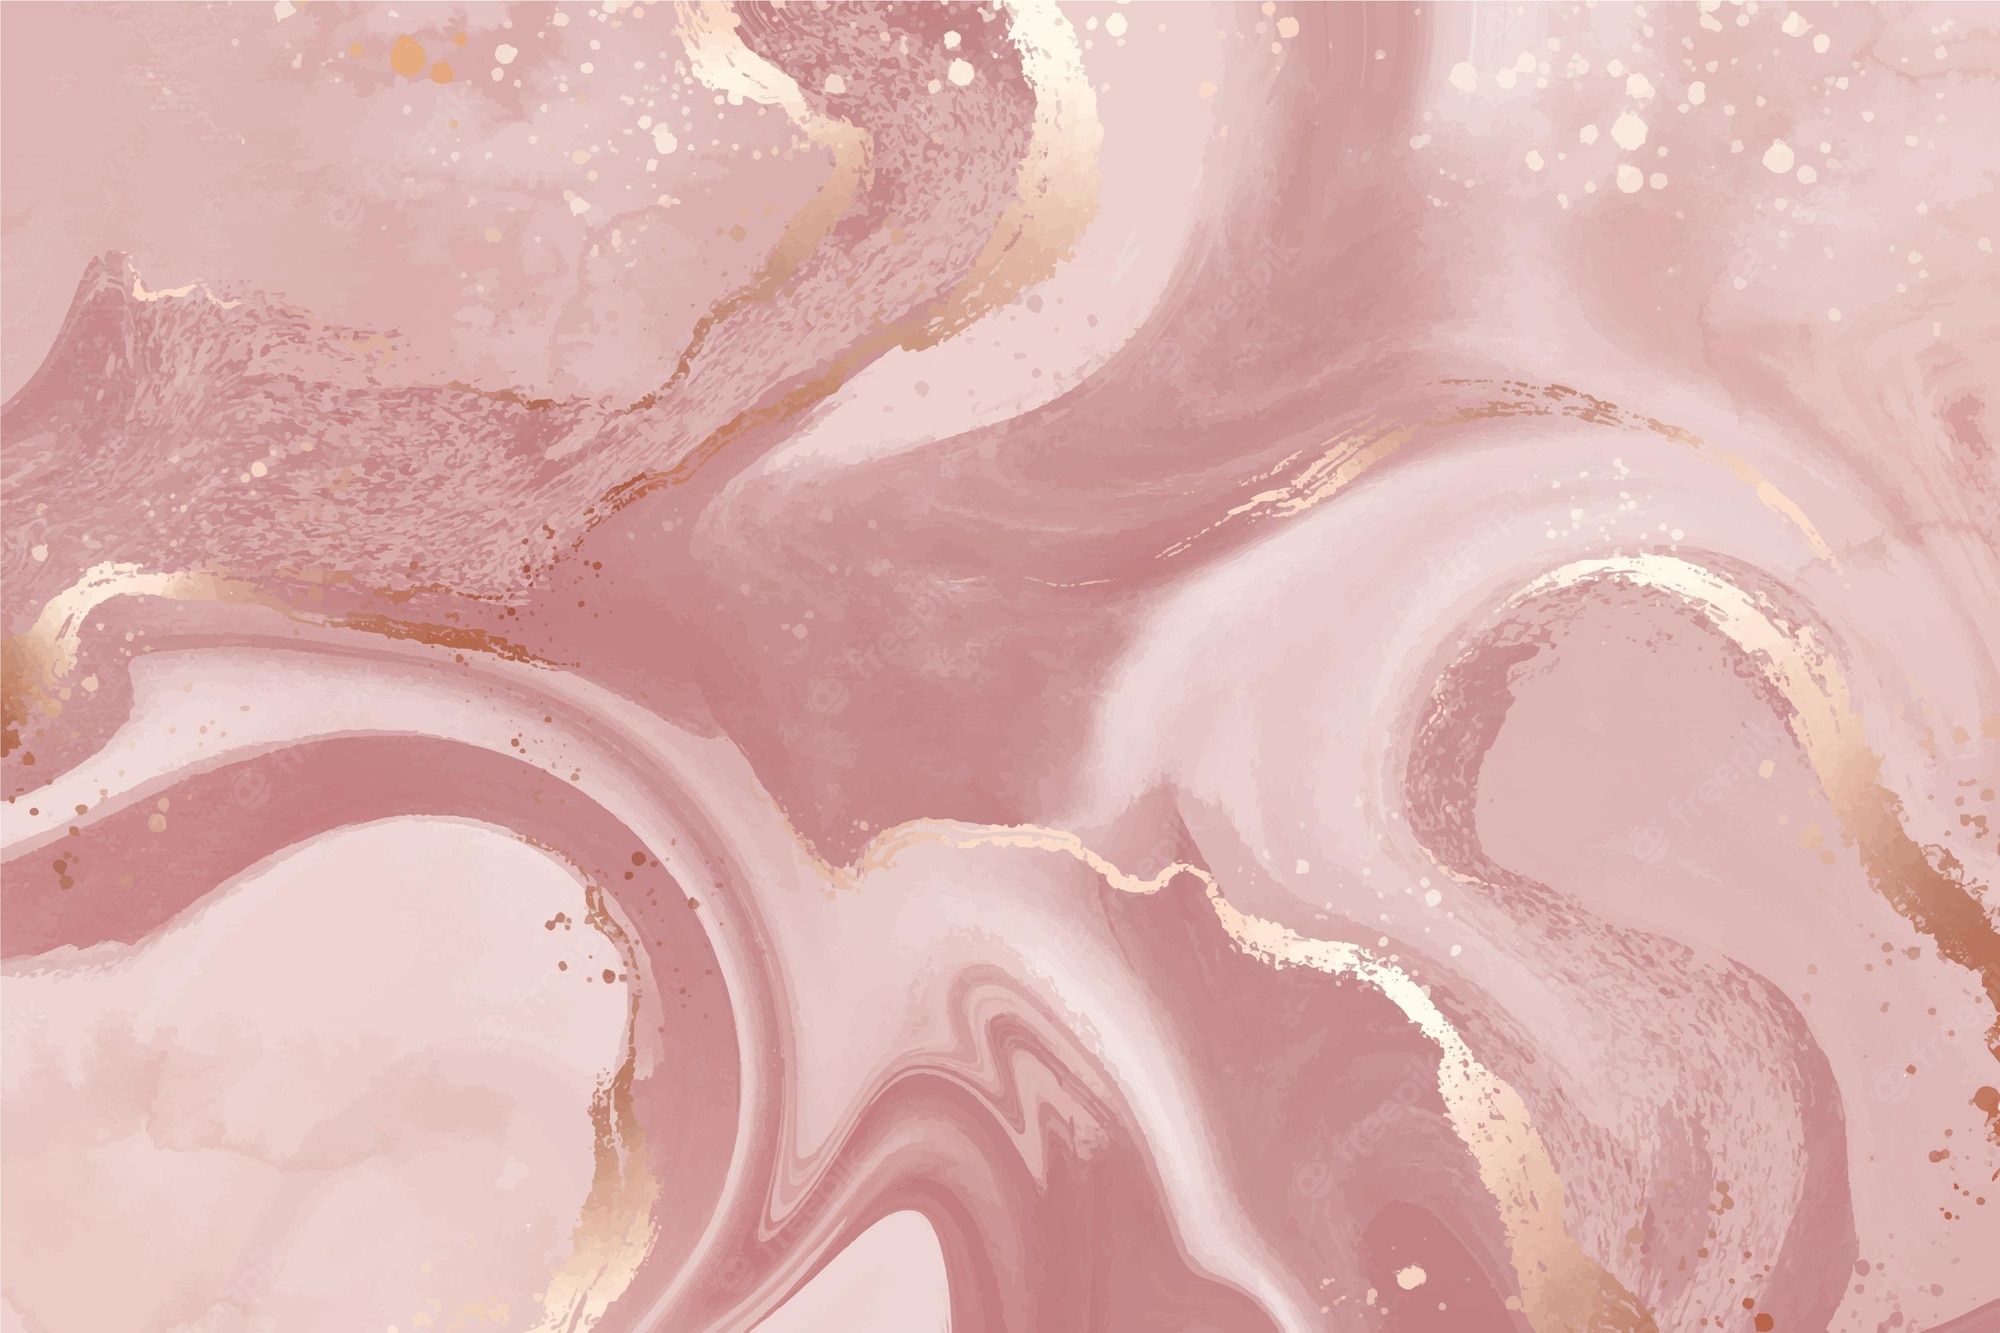 Pink marble Image. Free Vectors, & PSD